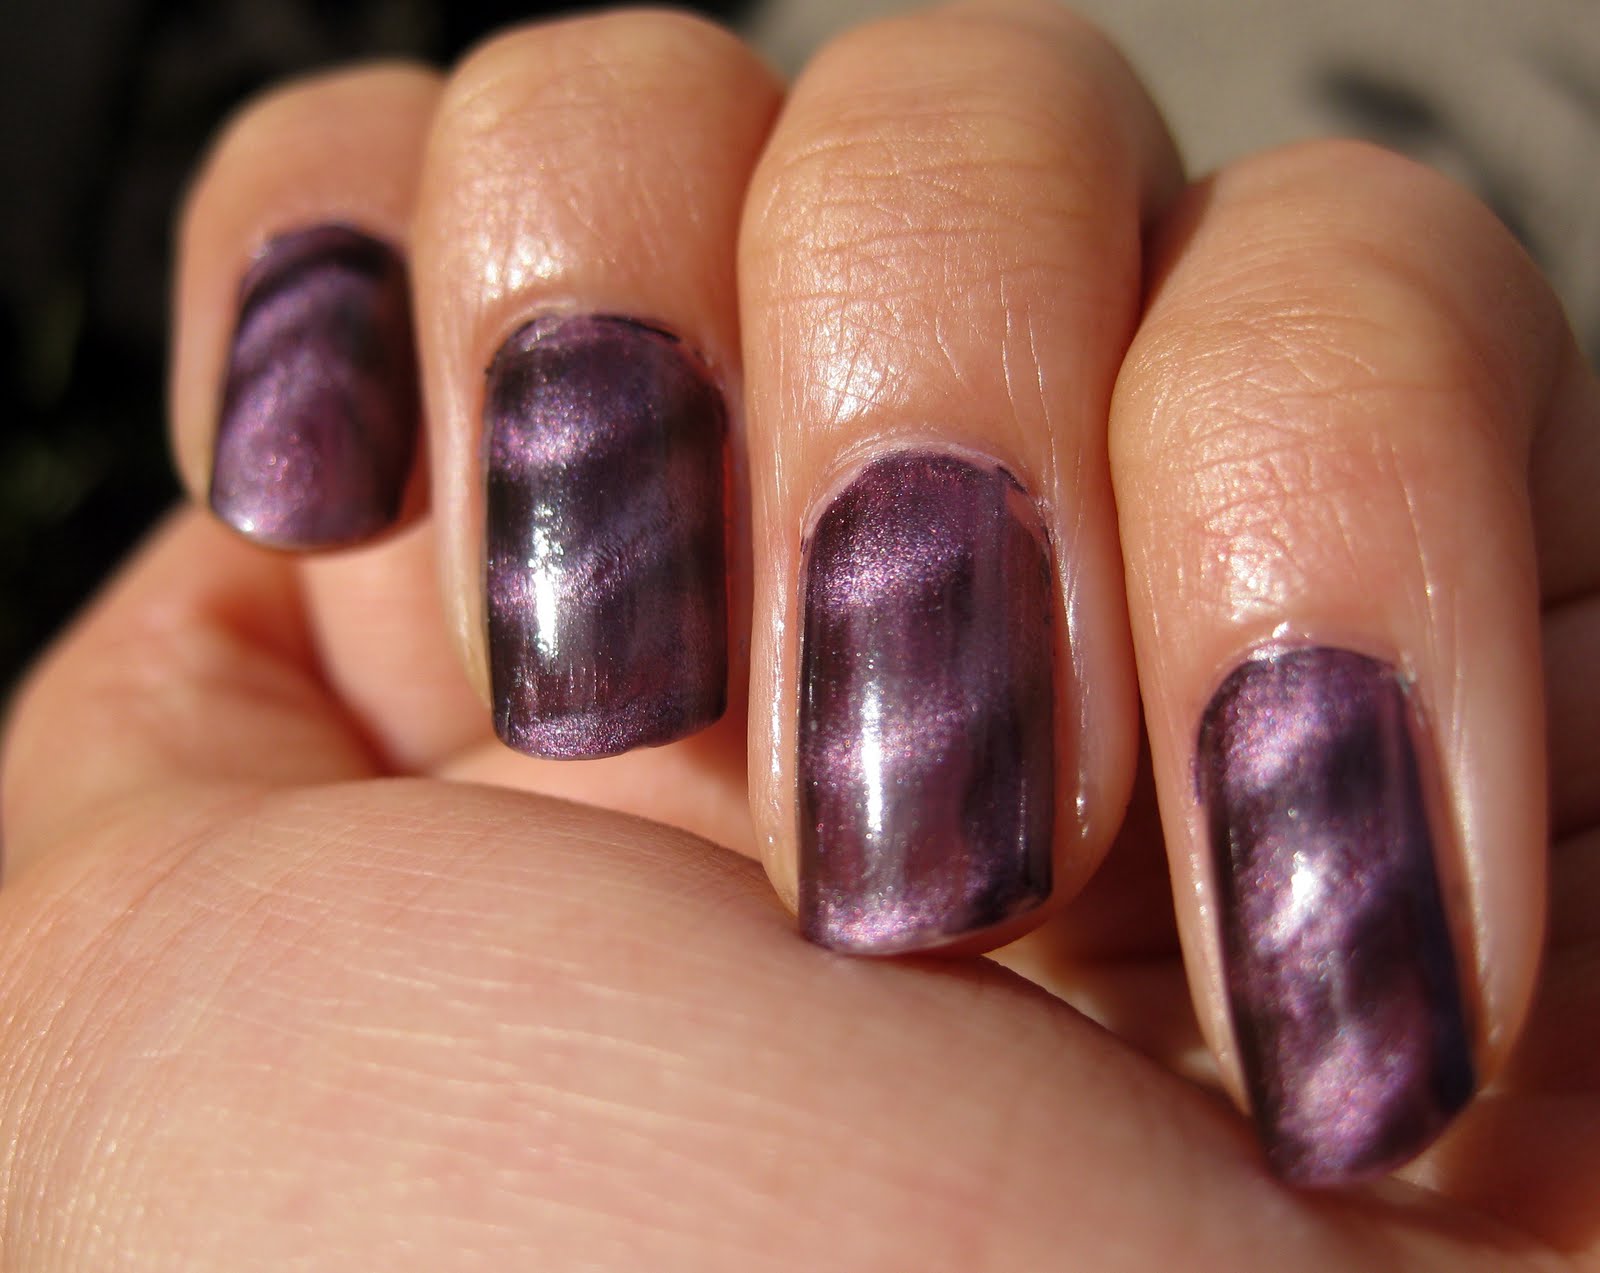 2. Magnetic nail polish - wide 2